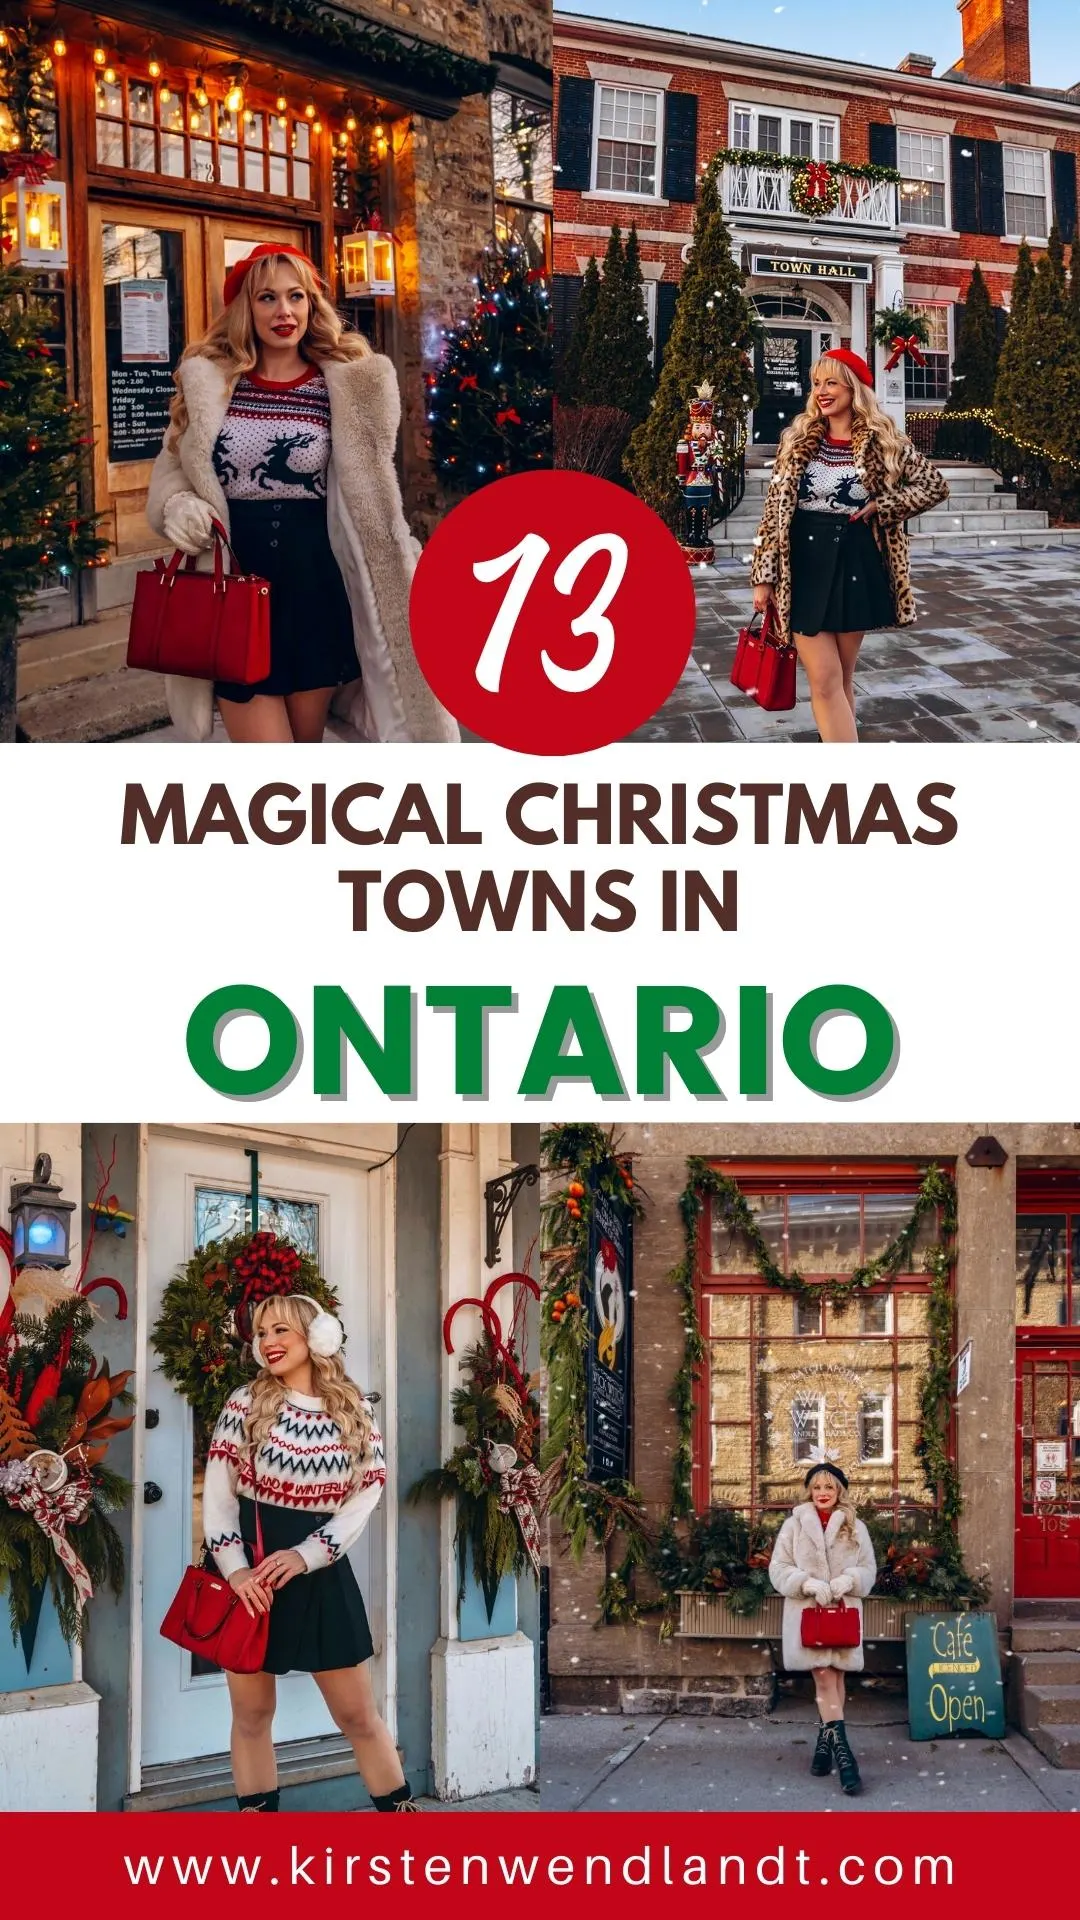 Ever wish you could step into a Hallmark Christmas movie? These 13 magical Christmas towns in Ontario will have you feeling just like you did! Pack your bags, load up the car, and get ready for the ultimate Christmas getaway - a road trip through Ontario's Christmas towns!